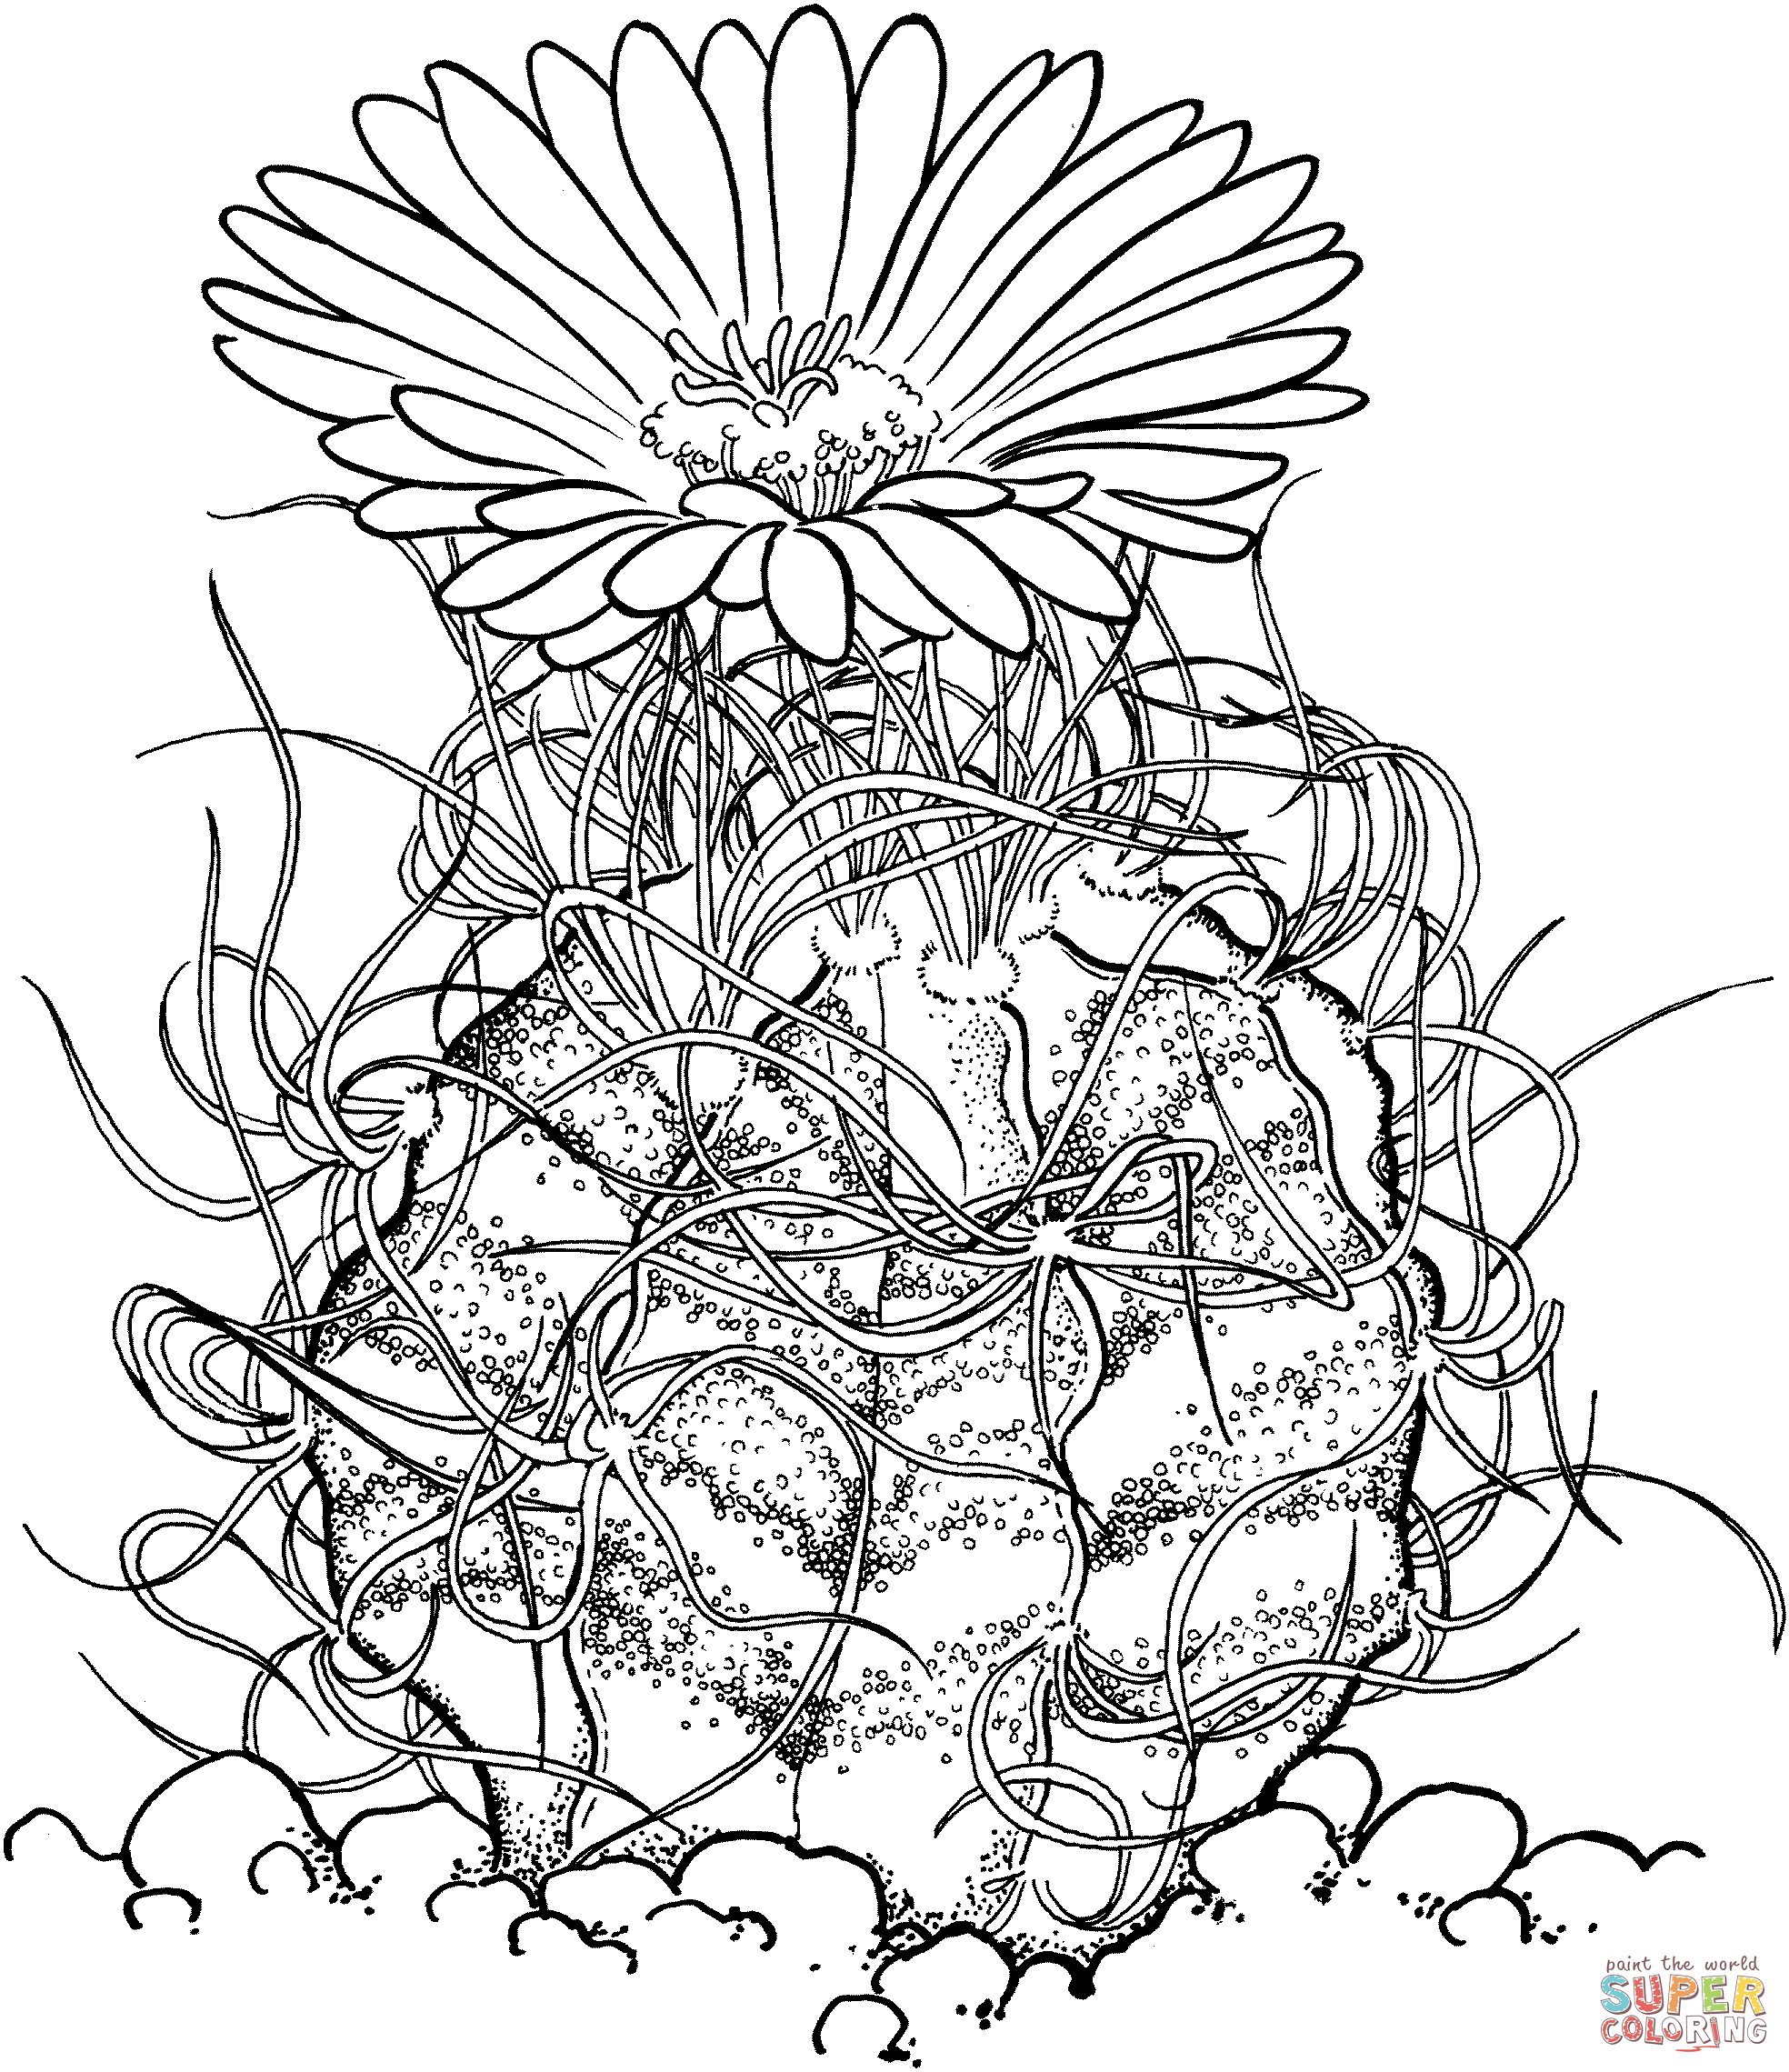 Astrophytum Capricorne or Goat’s Horn Cactus Coloring Page